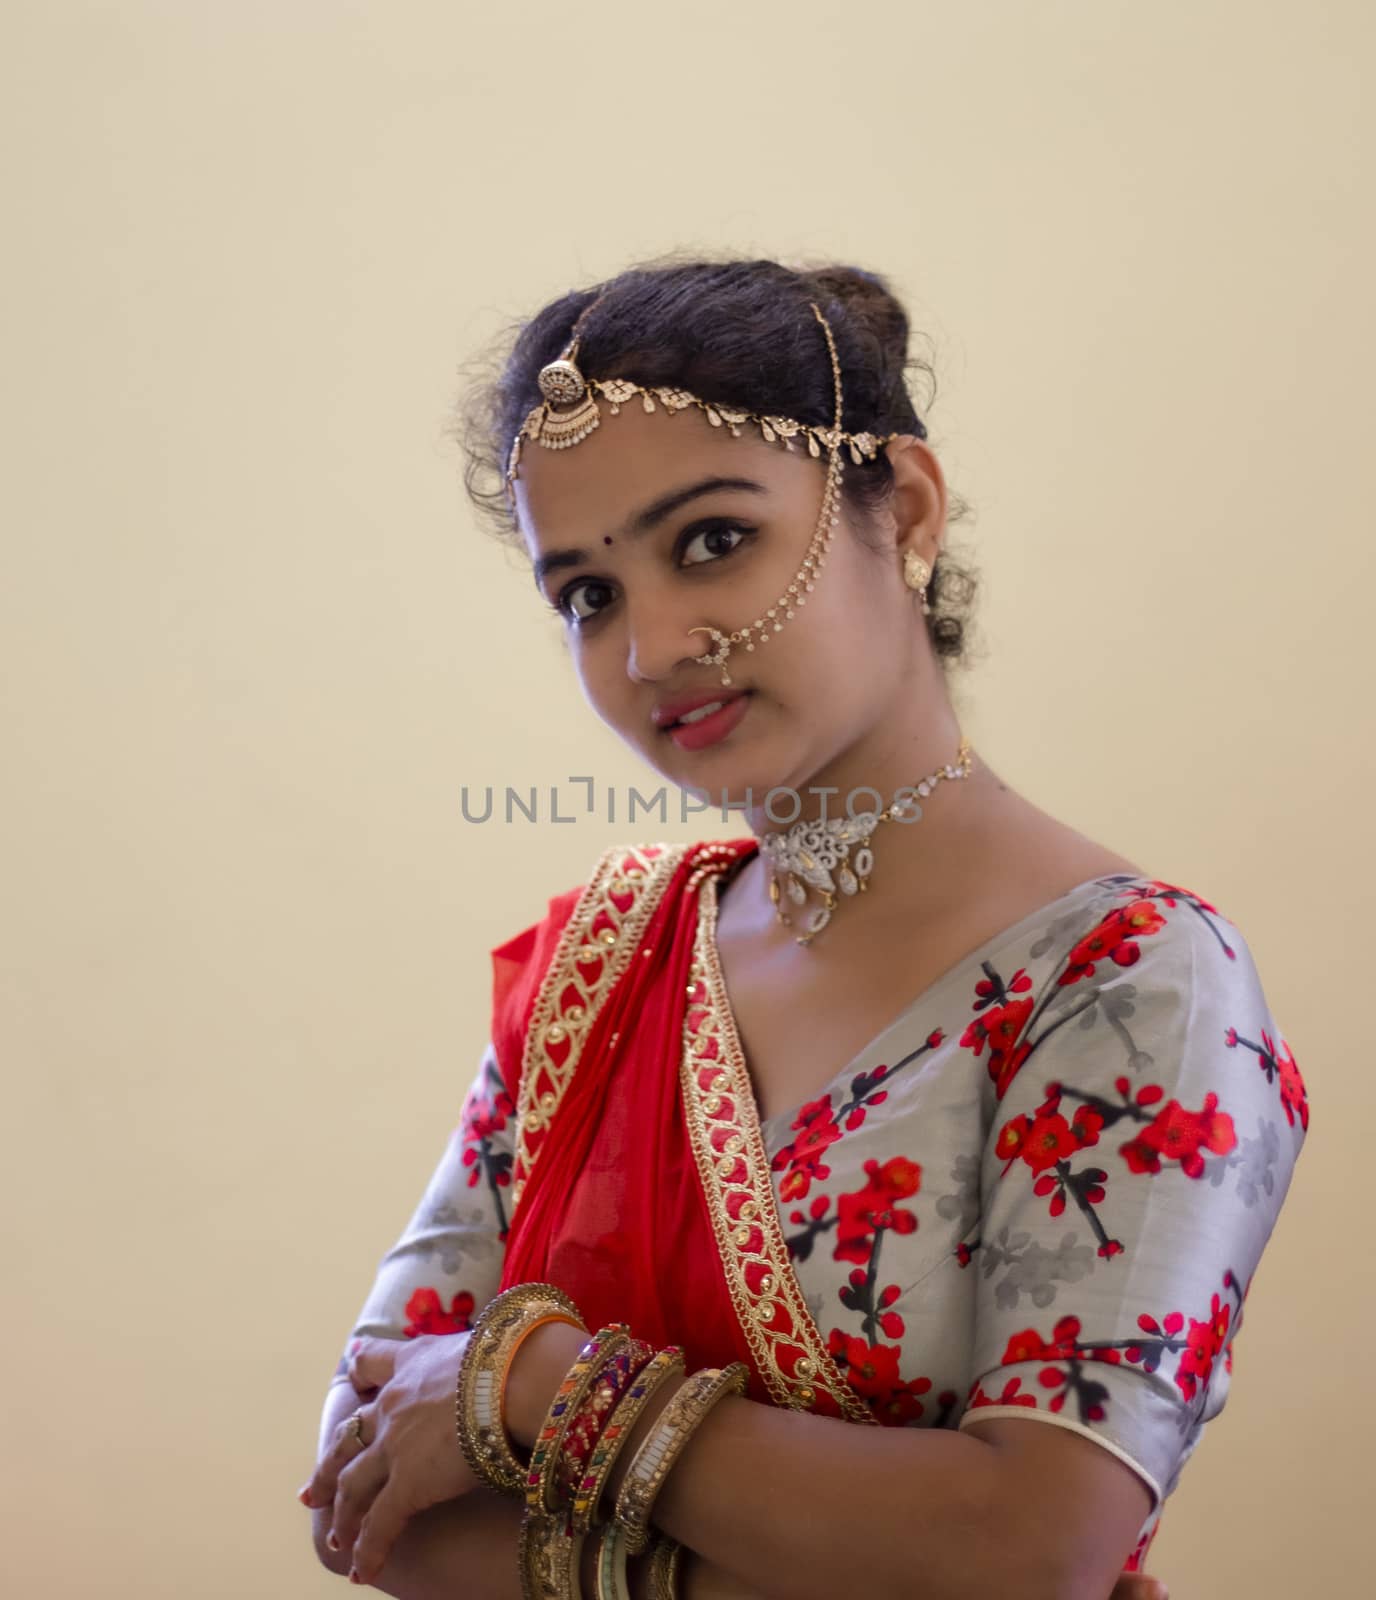 A beautiful young Hindu girl with gold ornaments according to her traditions and customs and red lipstick on her attractive soft lips